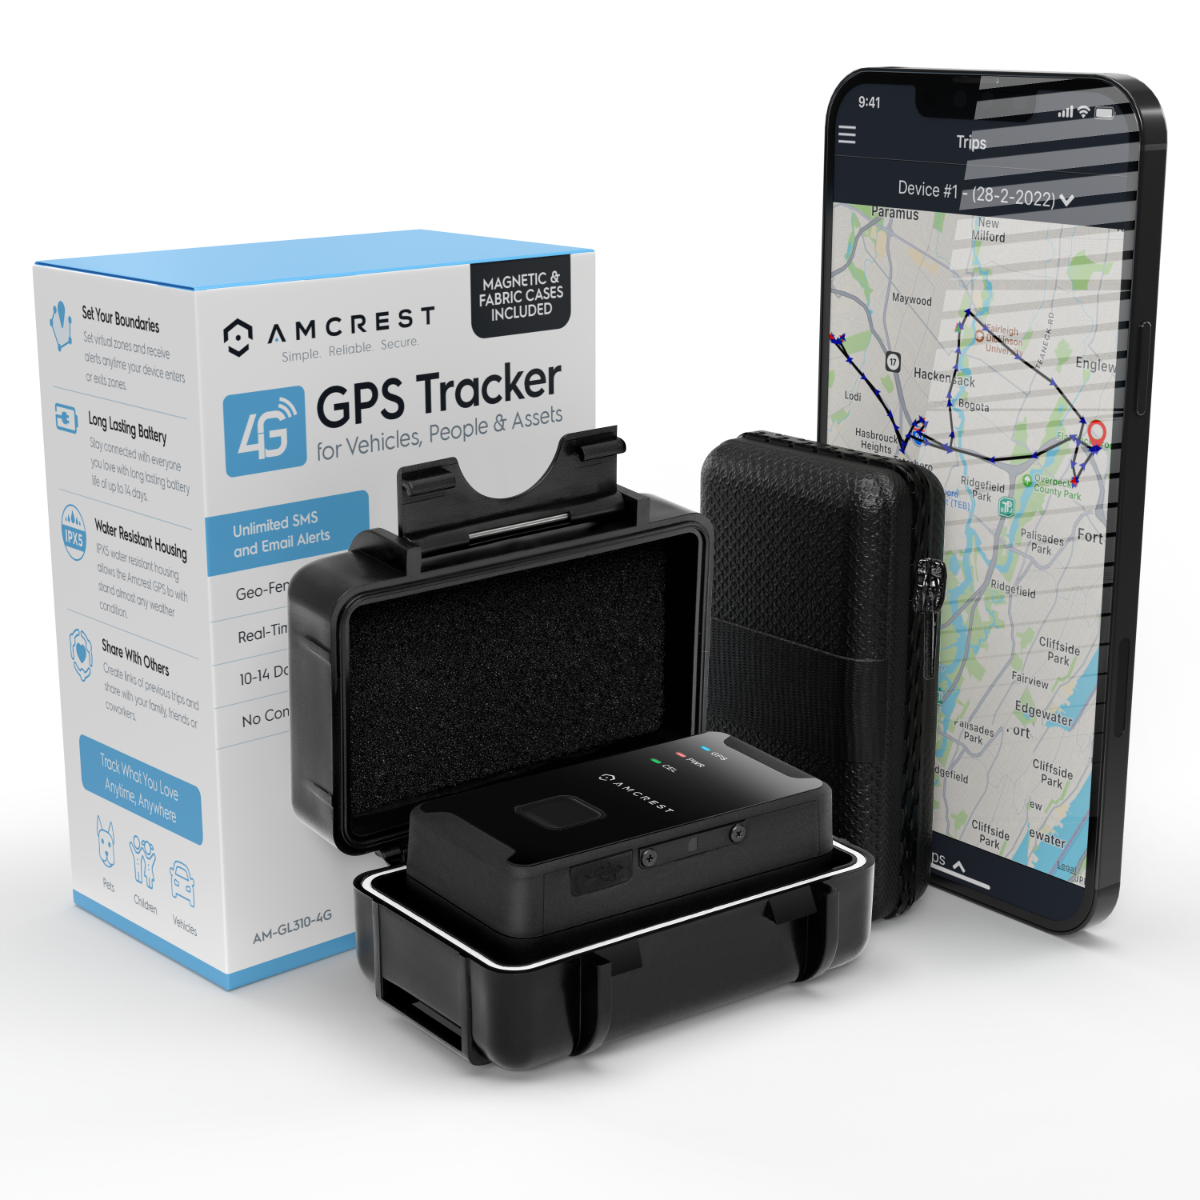 Amcrest 4G GPS Tracker for Vehicles, Portable GPS Tracking Device with Real  Time Tracking w/ 60 Second Updates, Unlimited Text/Email Alerts,  Geo-Fencing, 10-14 Day Battery (AM-GL300W-4G)